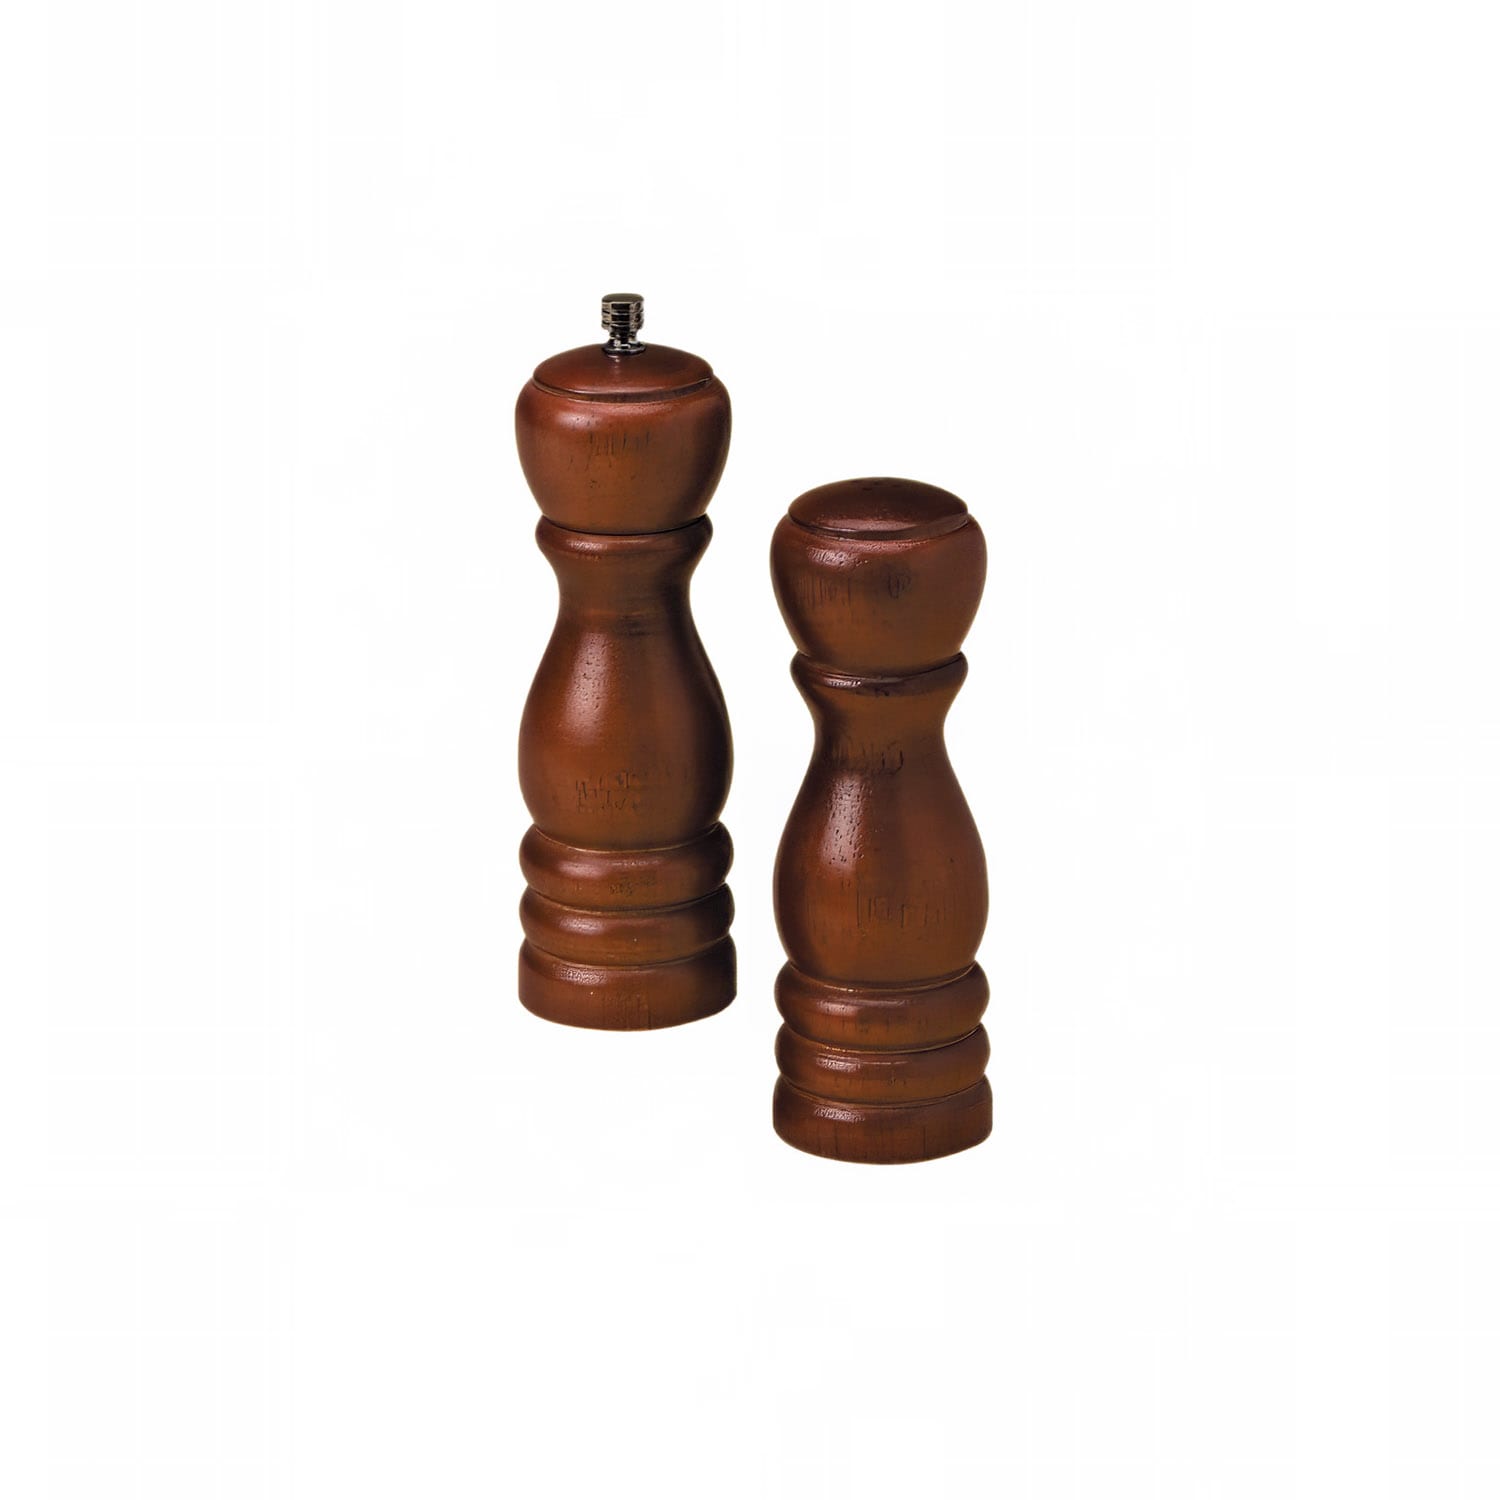 Winco SP-612, Salt Shaker and Pepper Grinder, Rubberwood with